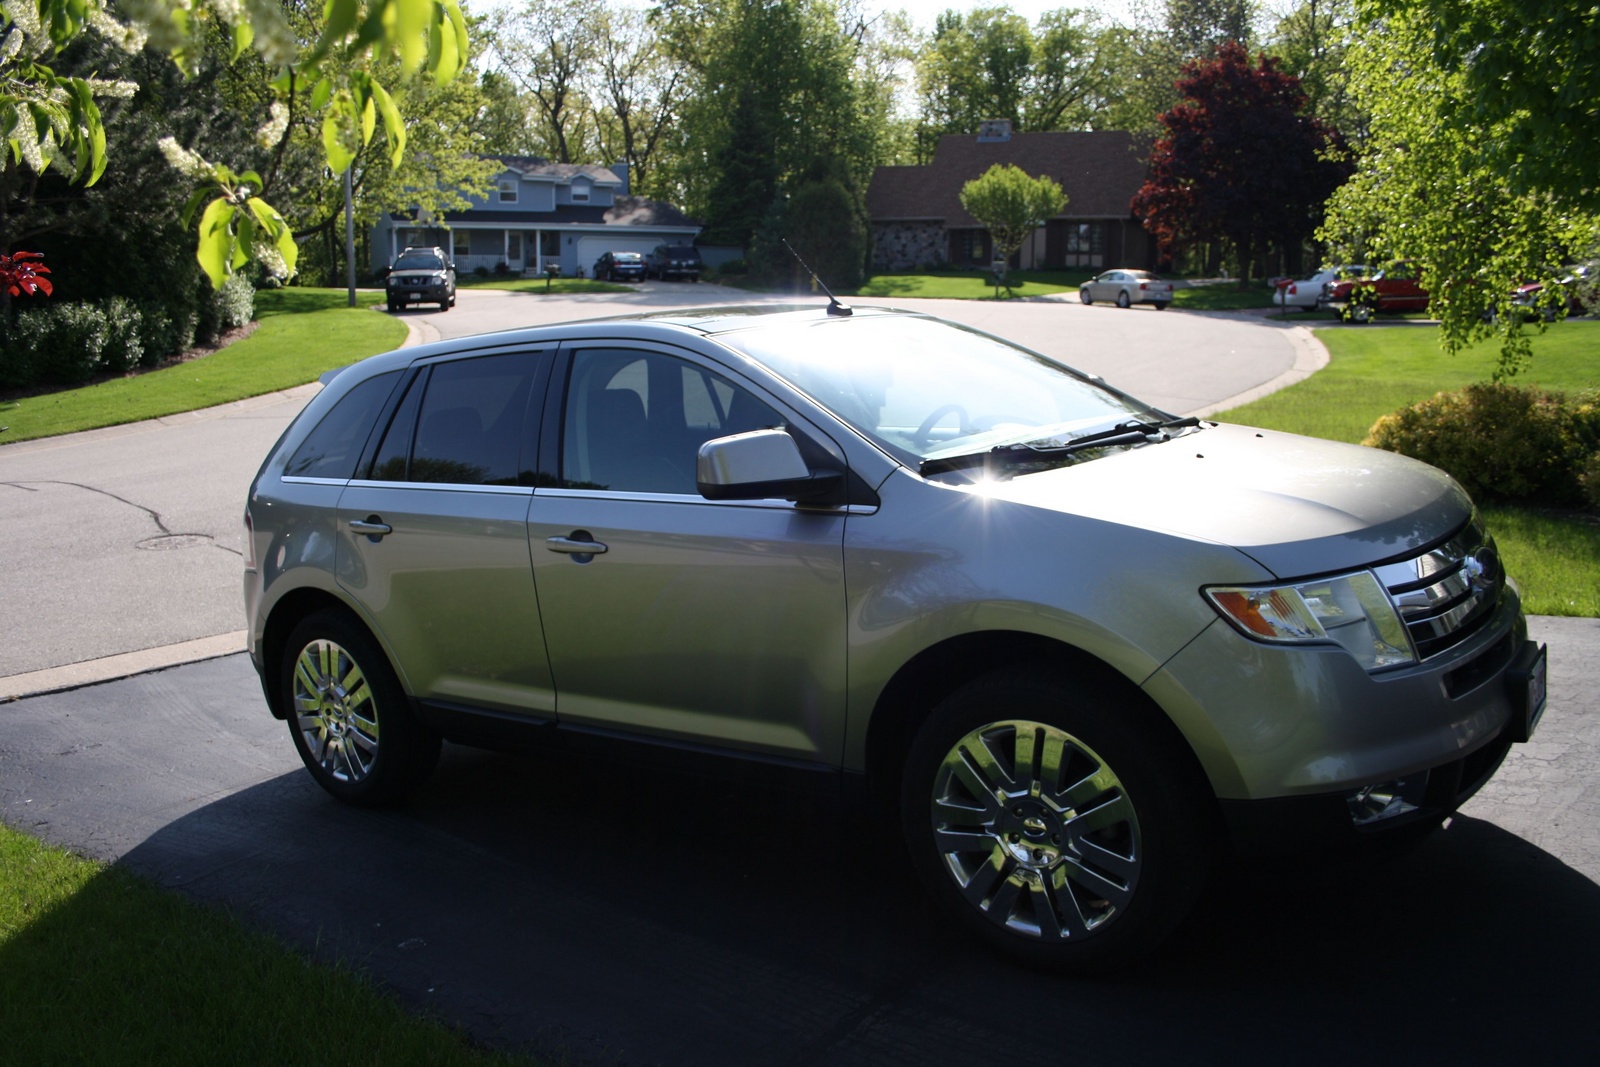 2007 Ford edge towing capacity